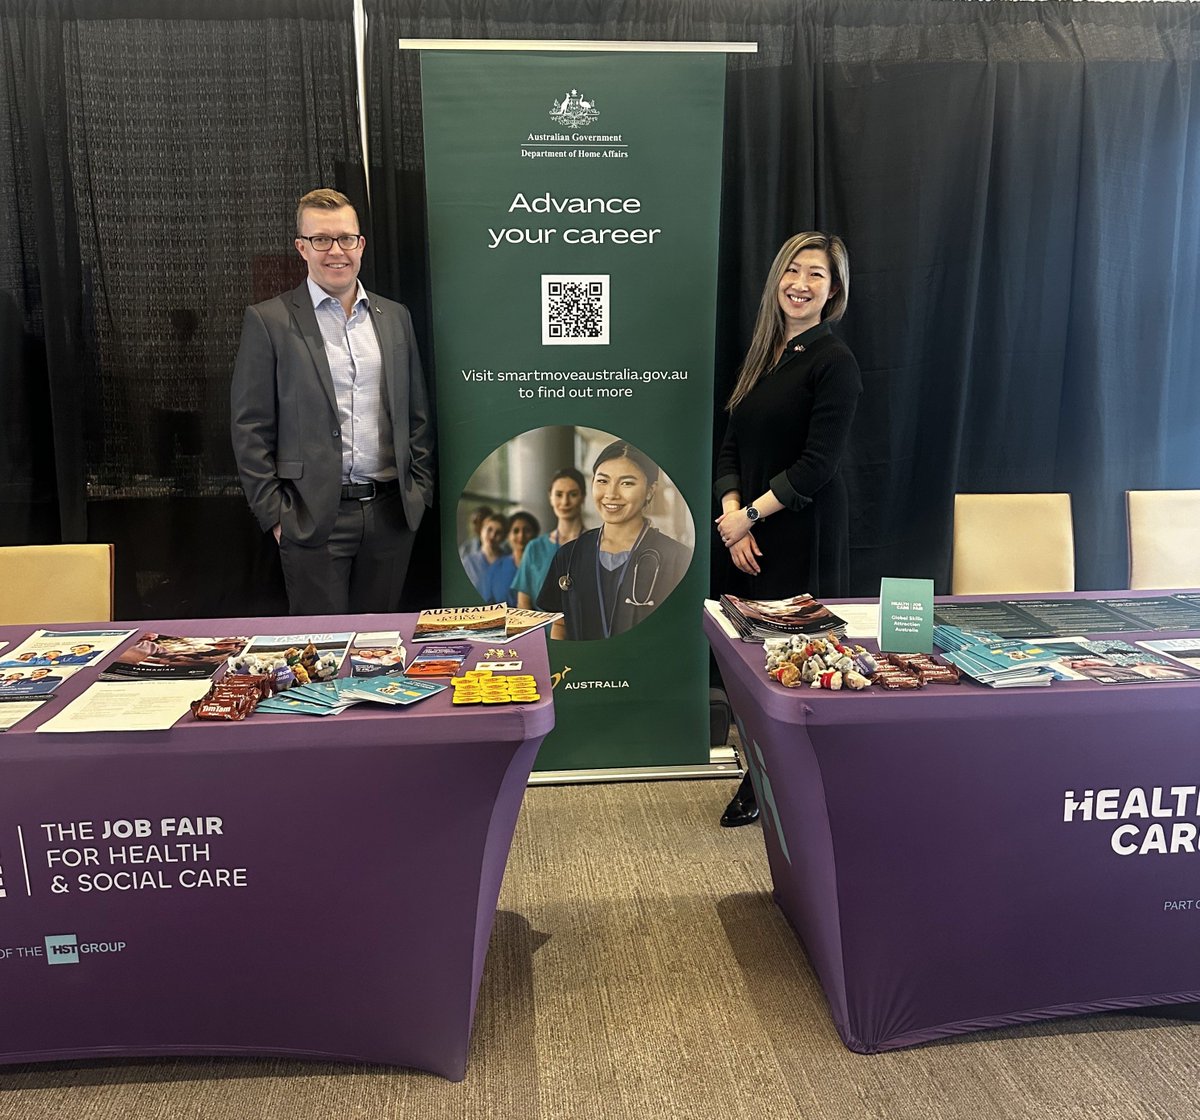 Just 4 days to go until our next Healthcare Job Fair in Toronto! Join us at the MTCC on Saturday for a unique chance to meet with the Australian Department of Home Affairs. Register online now and create your unique Healthdaq profile 👉hubs.ly/Q02rwRhx0